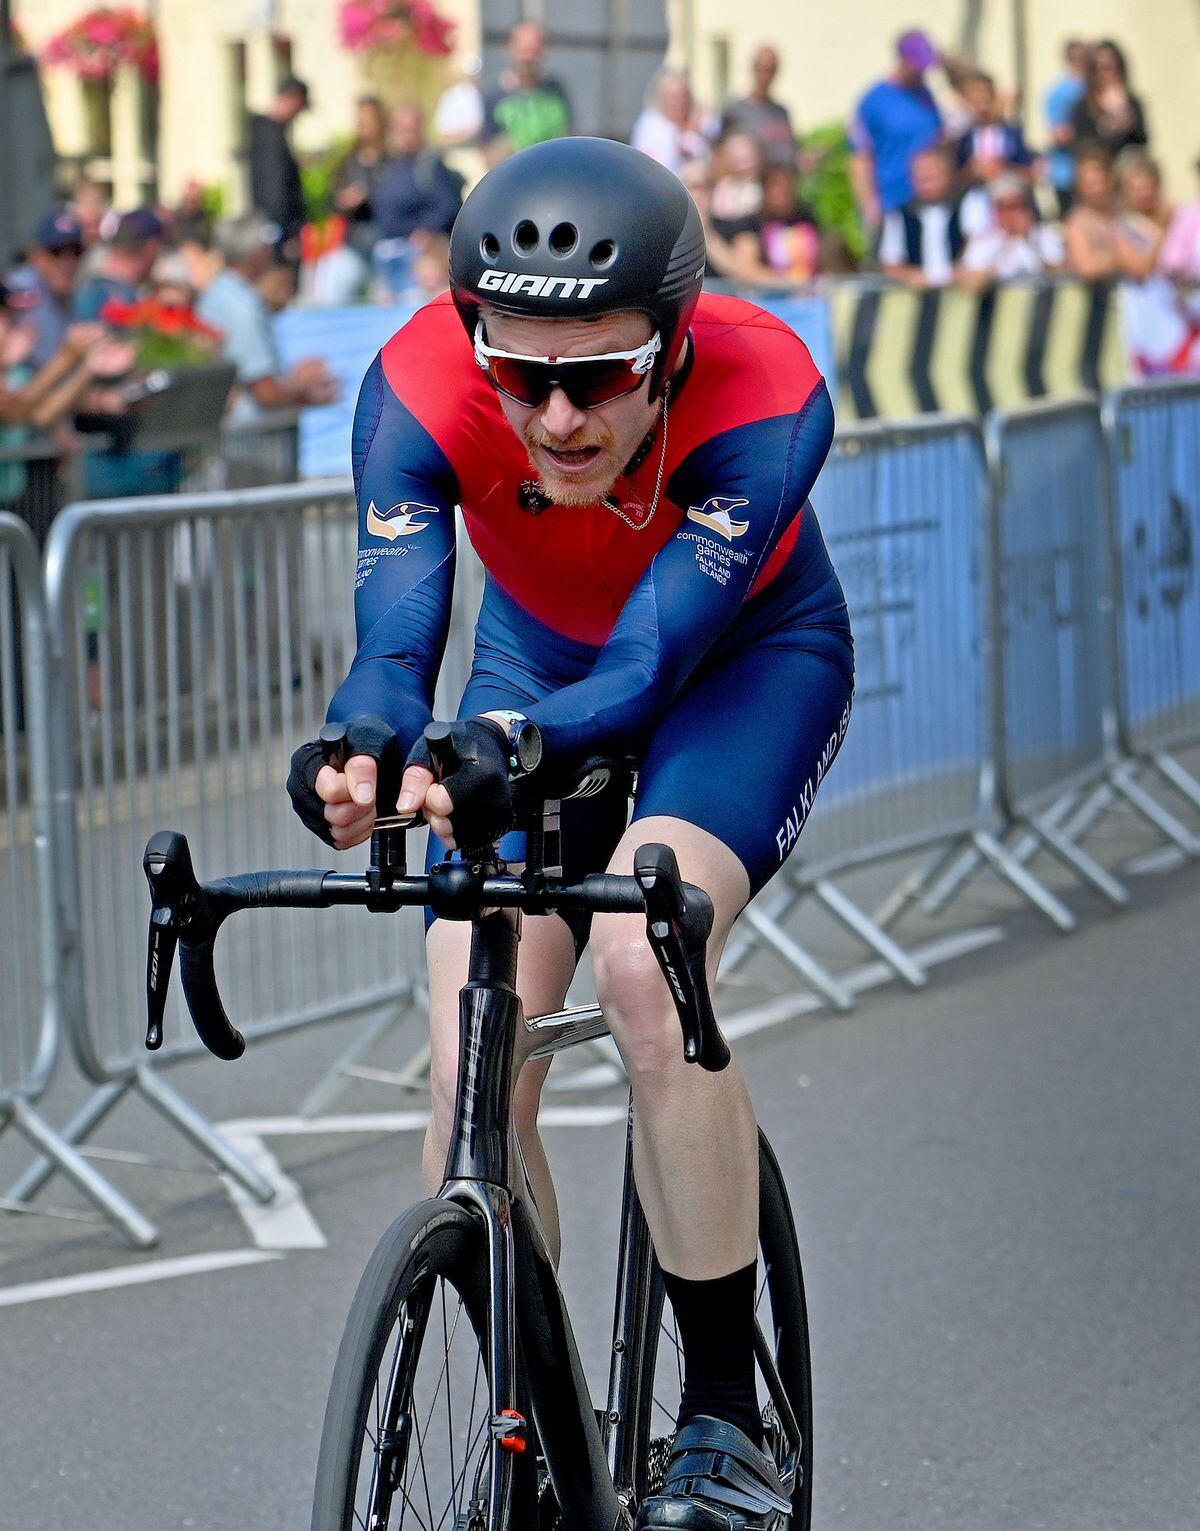 Jim Horton from Walsall rides for the Falklands in the time trial